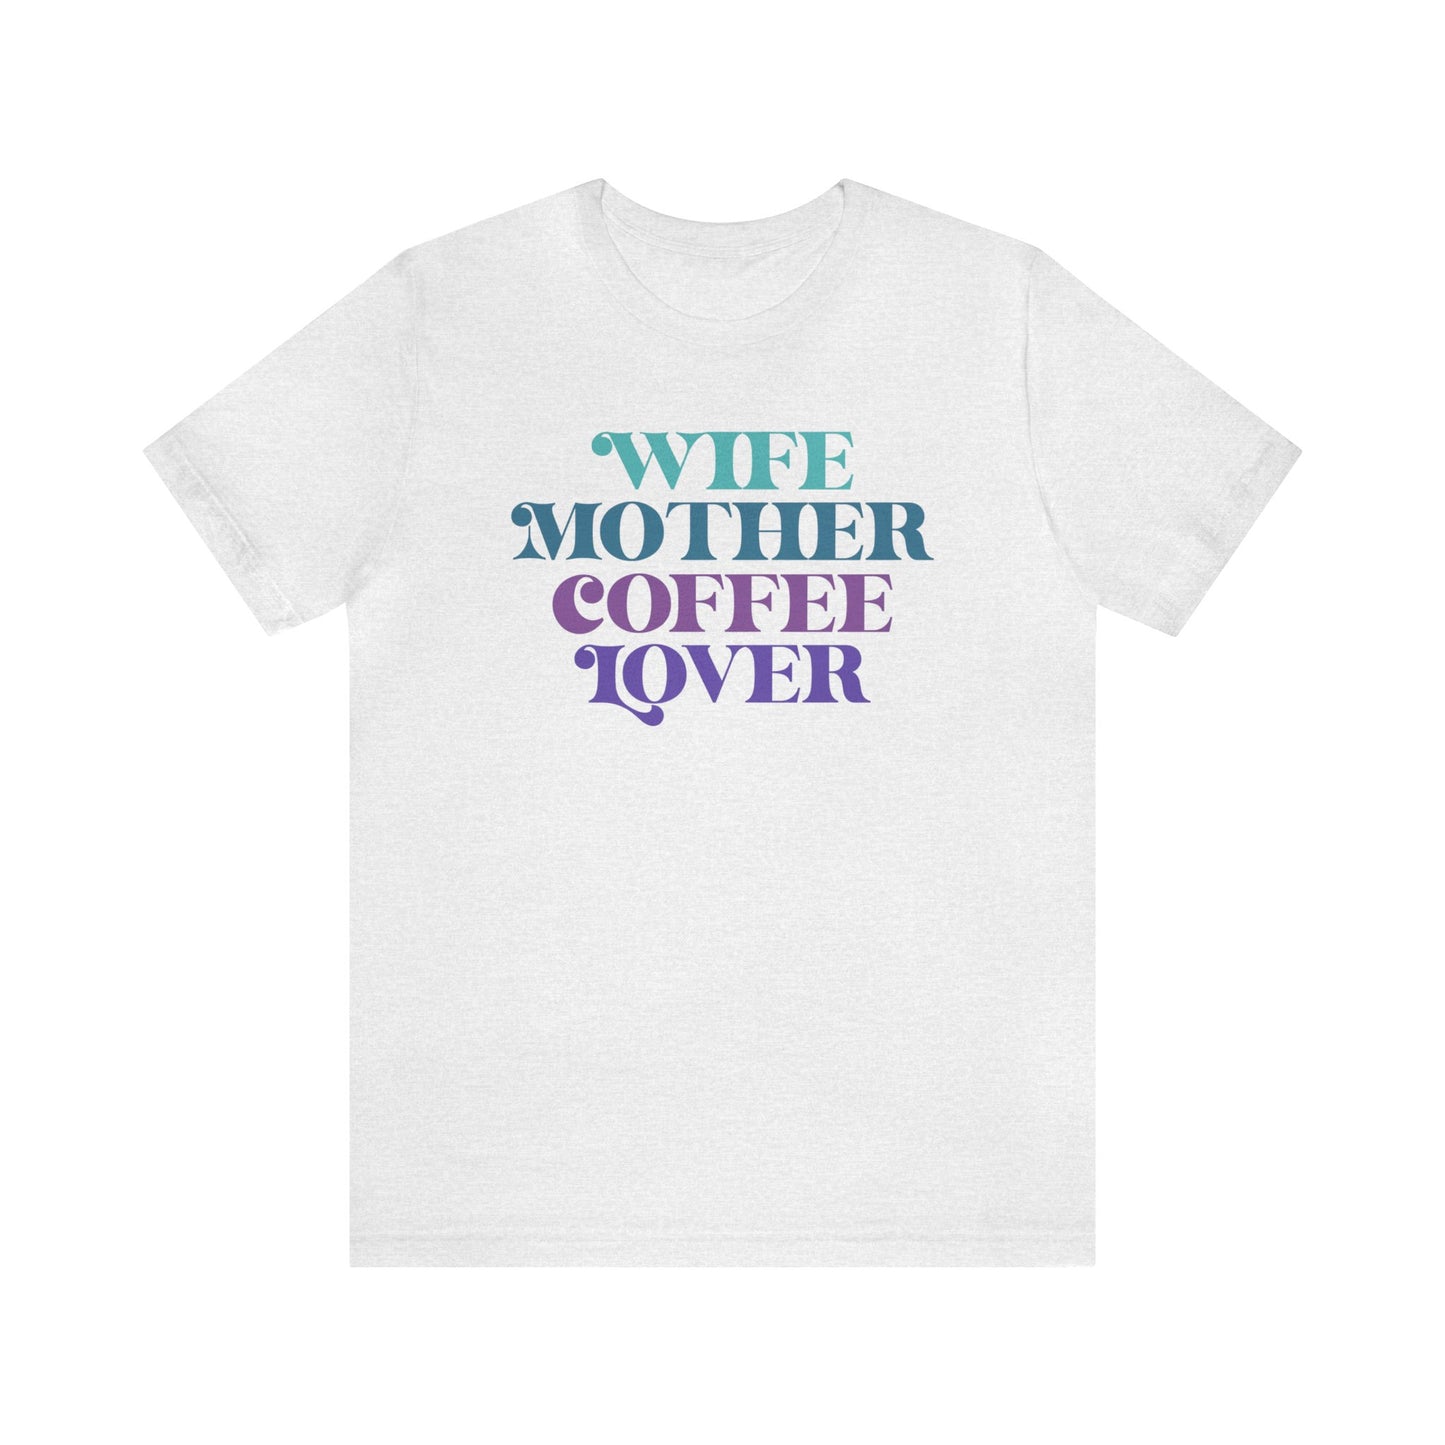 Mom T-Shirt For Wife TShirt For Coffee Lover T Shirt For Mothers Day Tee